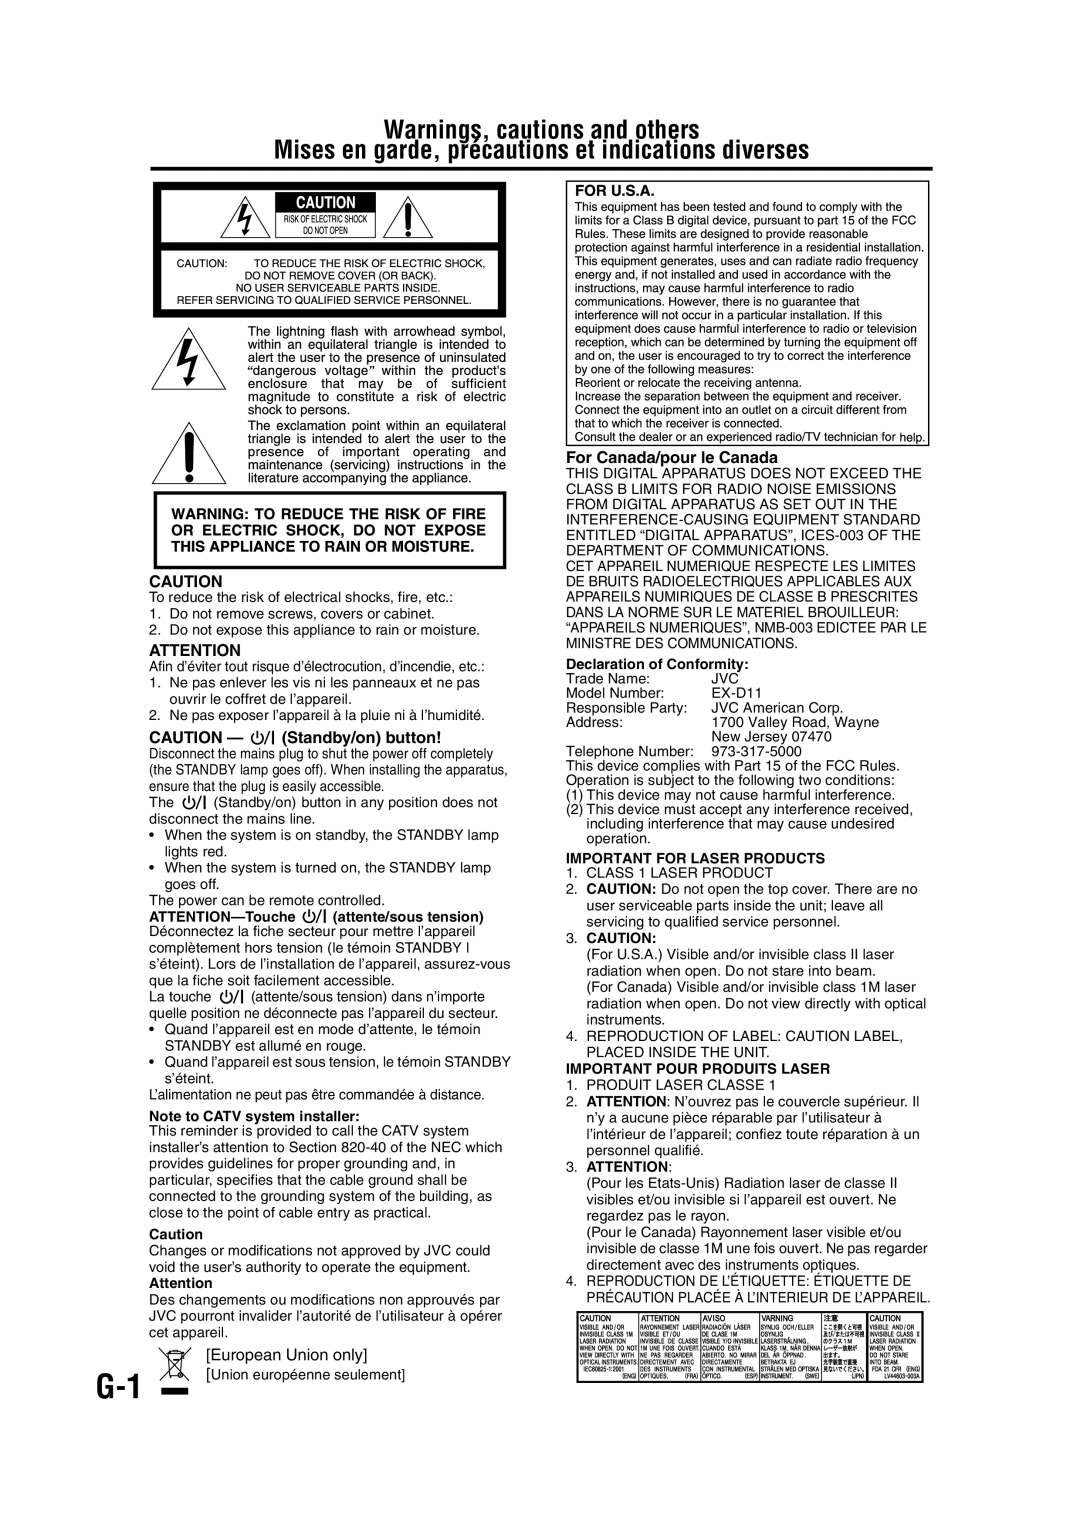 JVC EX-D11 manual Warnings, cautions and others, CAUTION — Standby/on button, For Canada/pour le Canada 